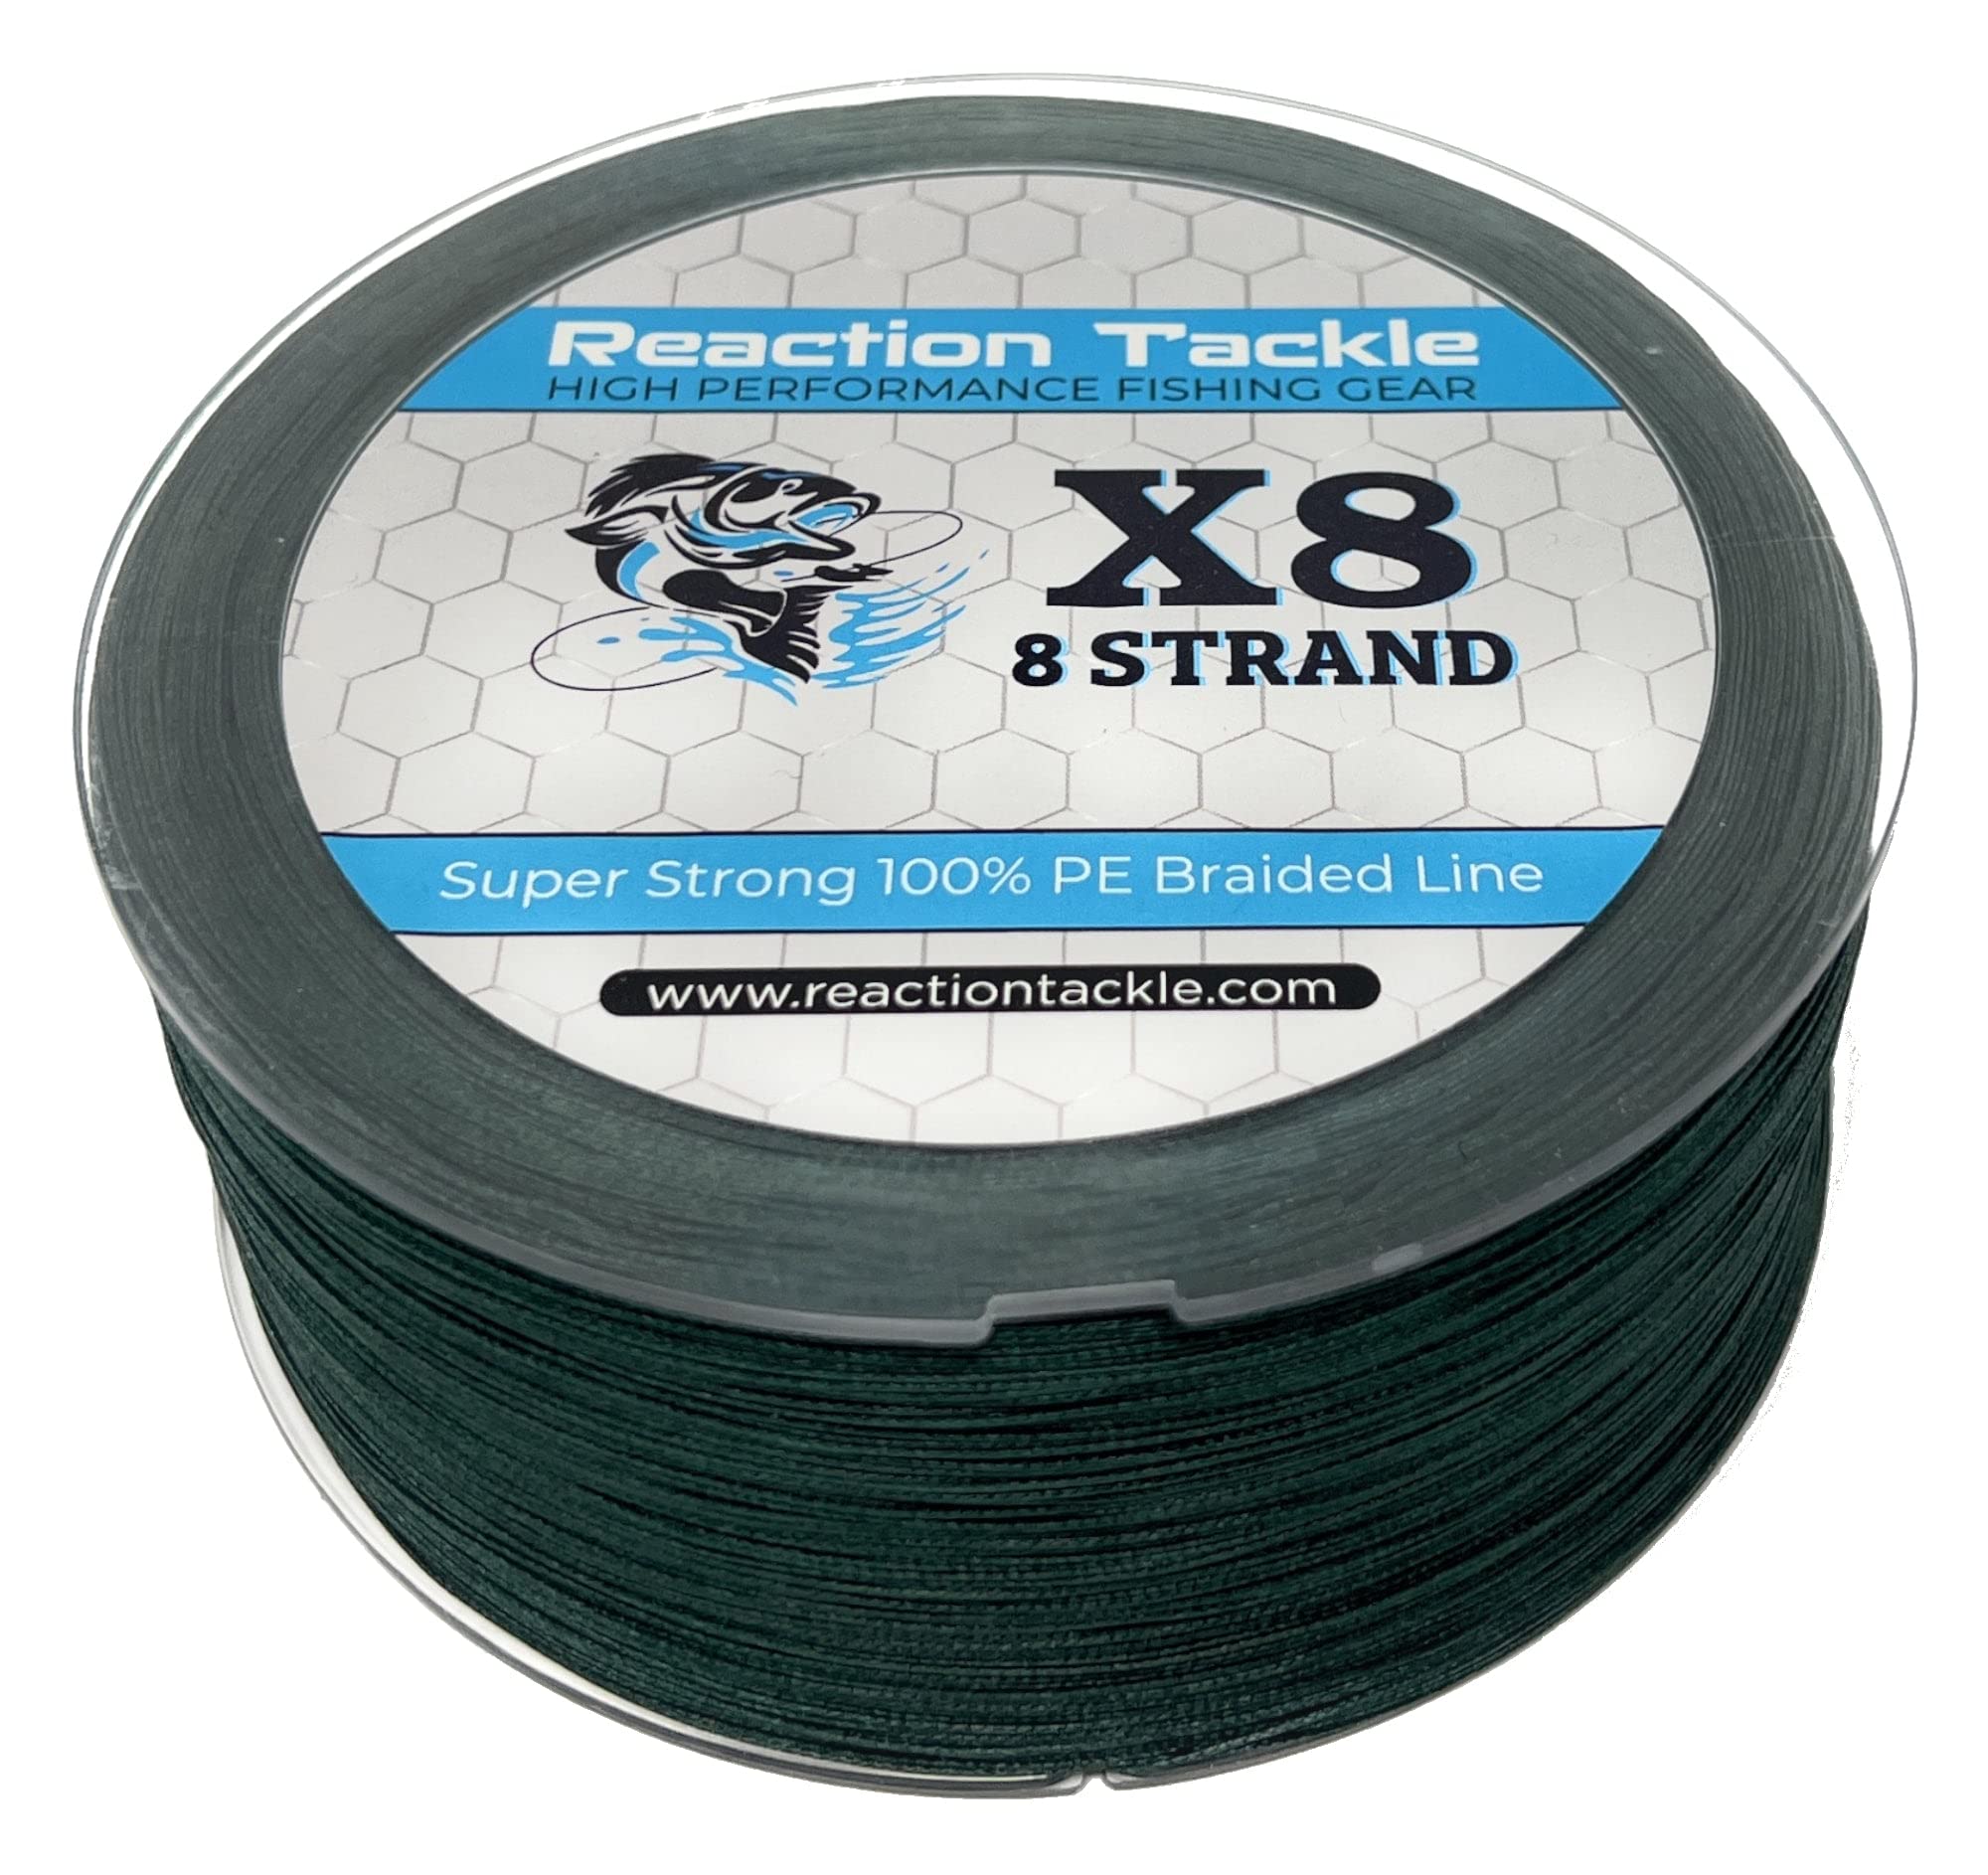 Reaction Tackle Braided Fishing Line - 8 Strand Moss green 200LB